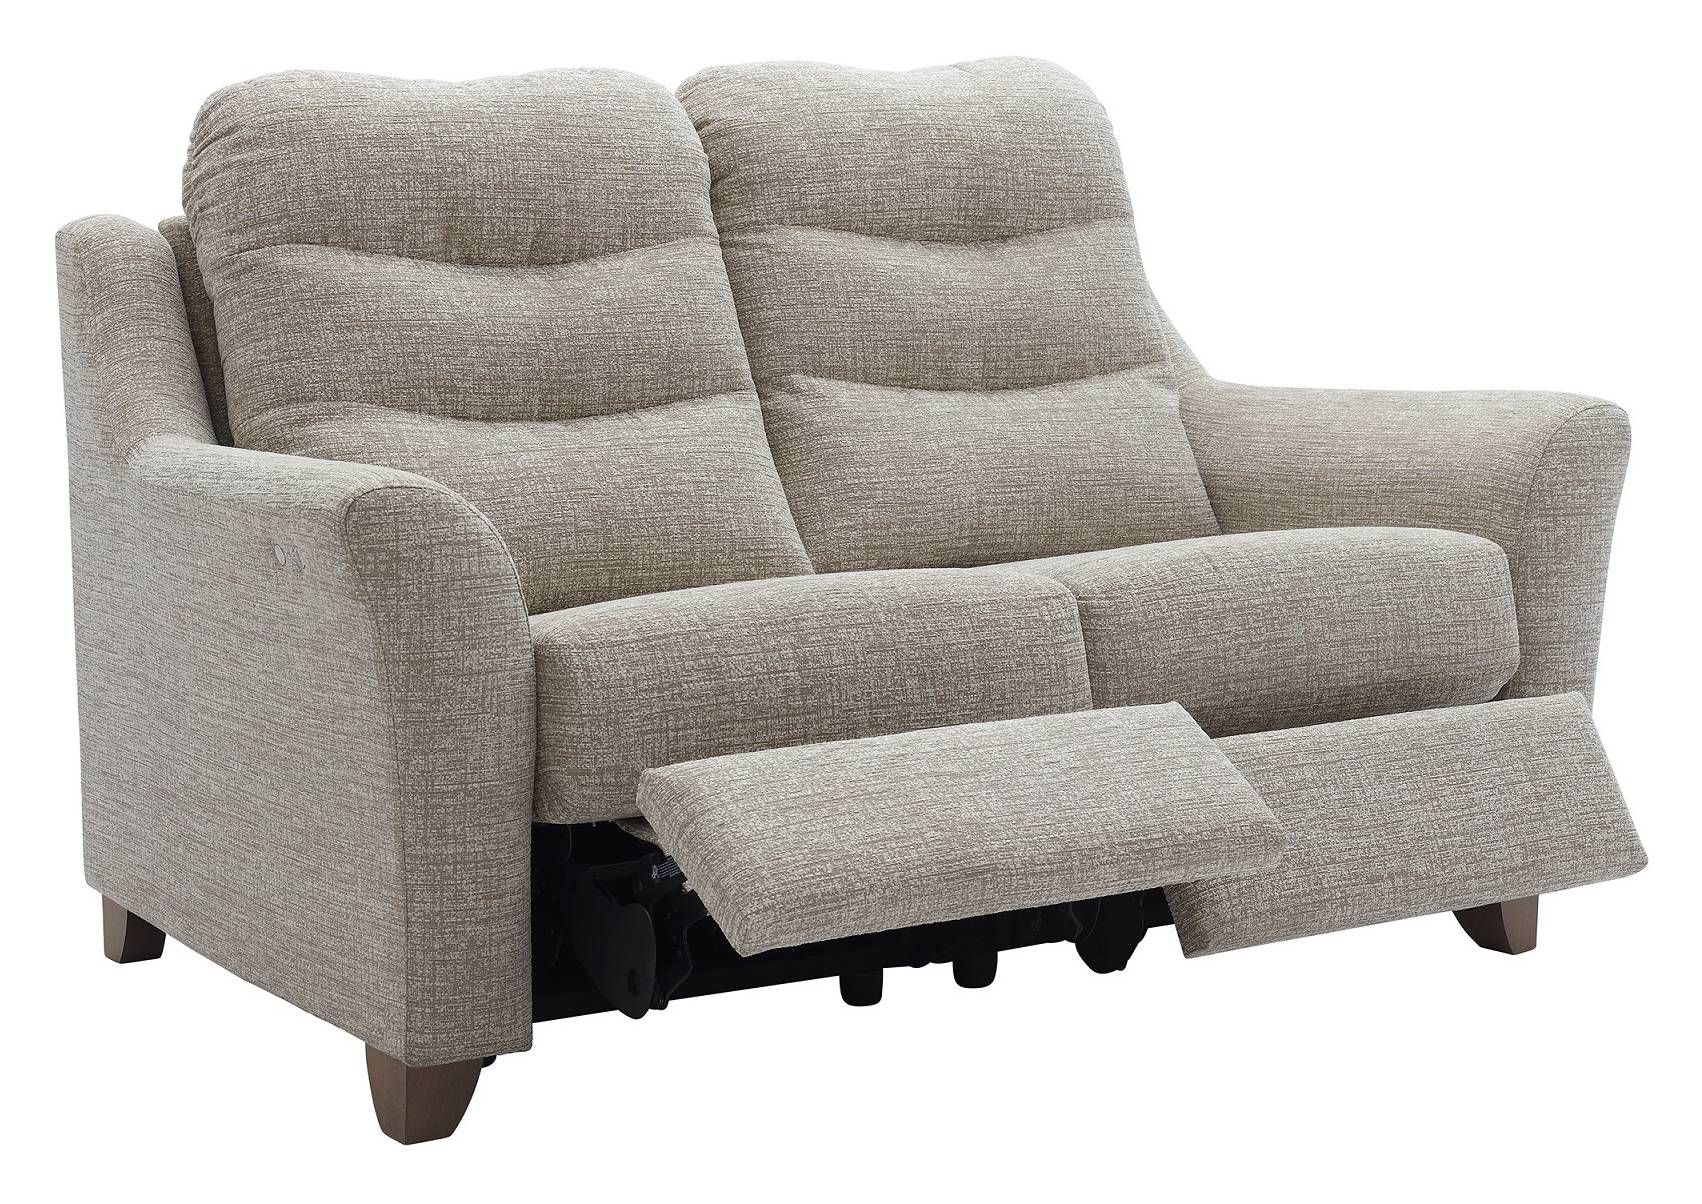 G Plan Tate Fixed & Recliner Sofa |oldrids & Downtown Within Tate Ii Sofa Chairs (View 11 of 25)